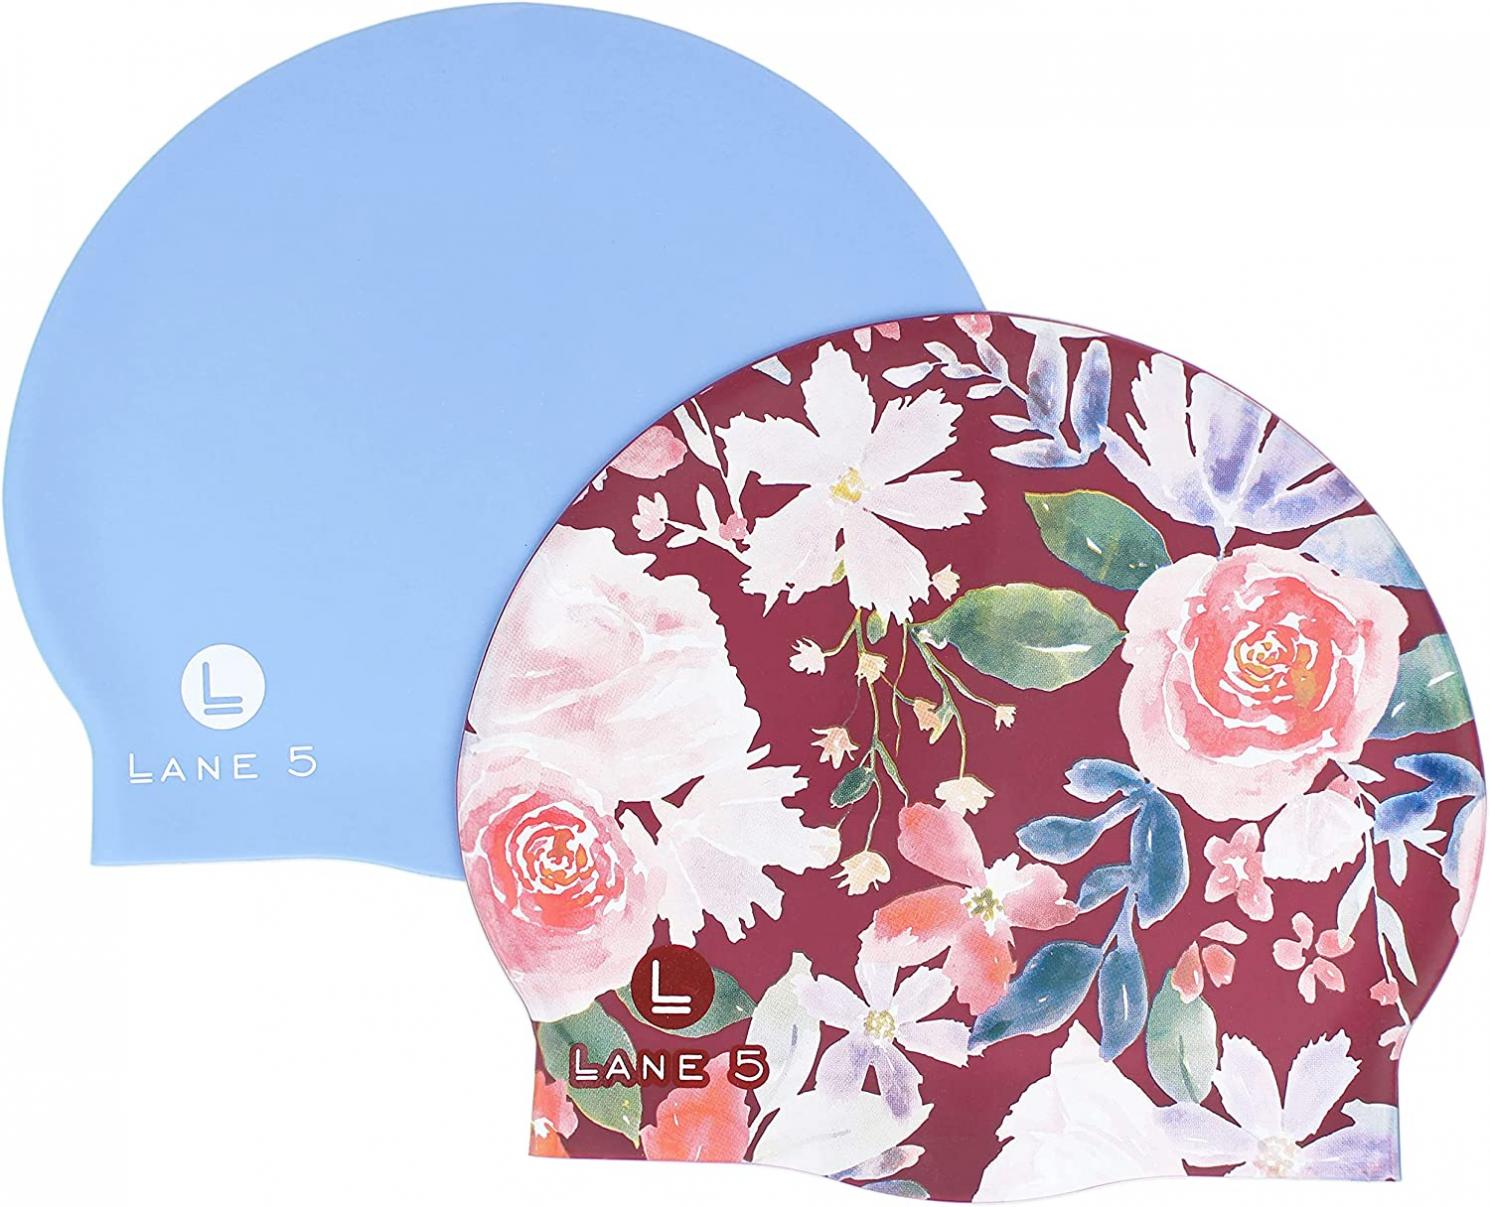 Lane5 Swim - 2-Pack Adult Silicone Swim Cap - Beautiful Designs for Women. Latex Free. Winter Maroon Floral and Periwinkle